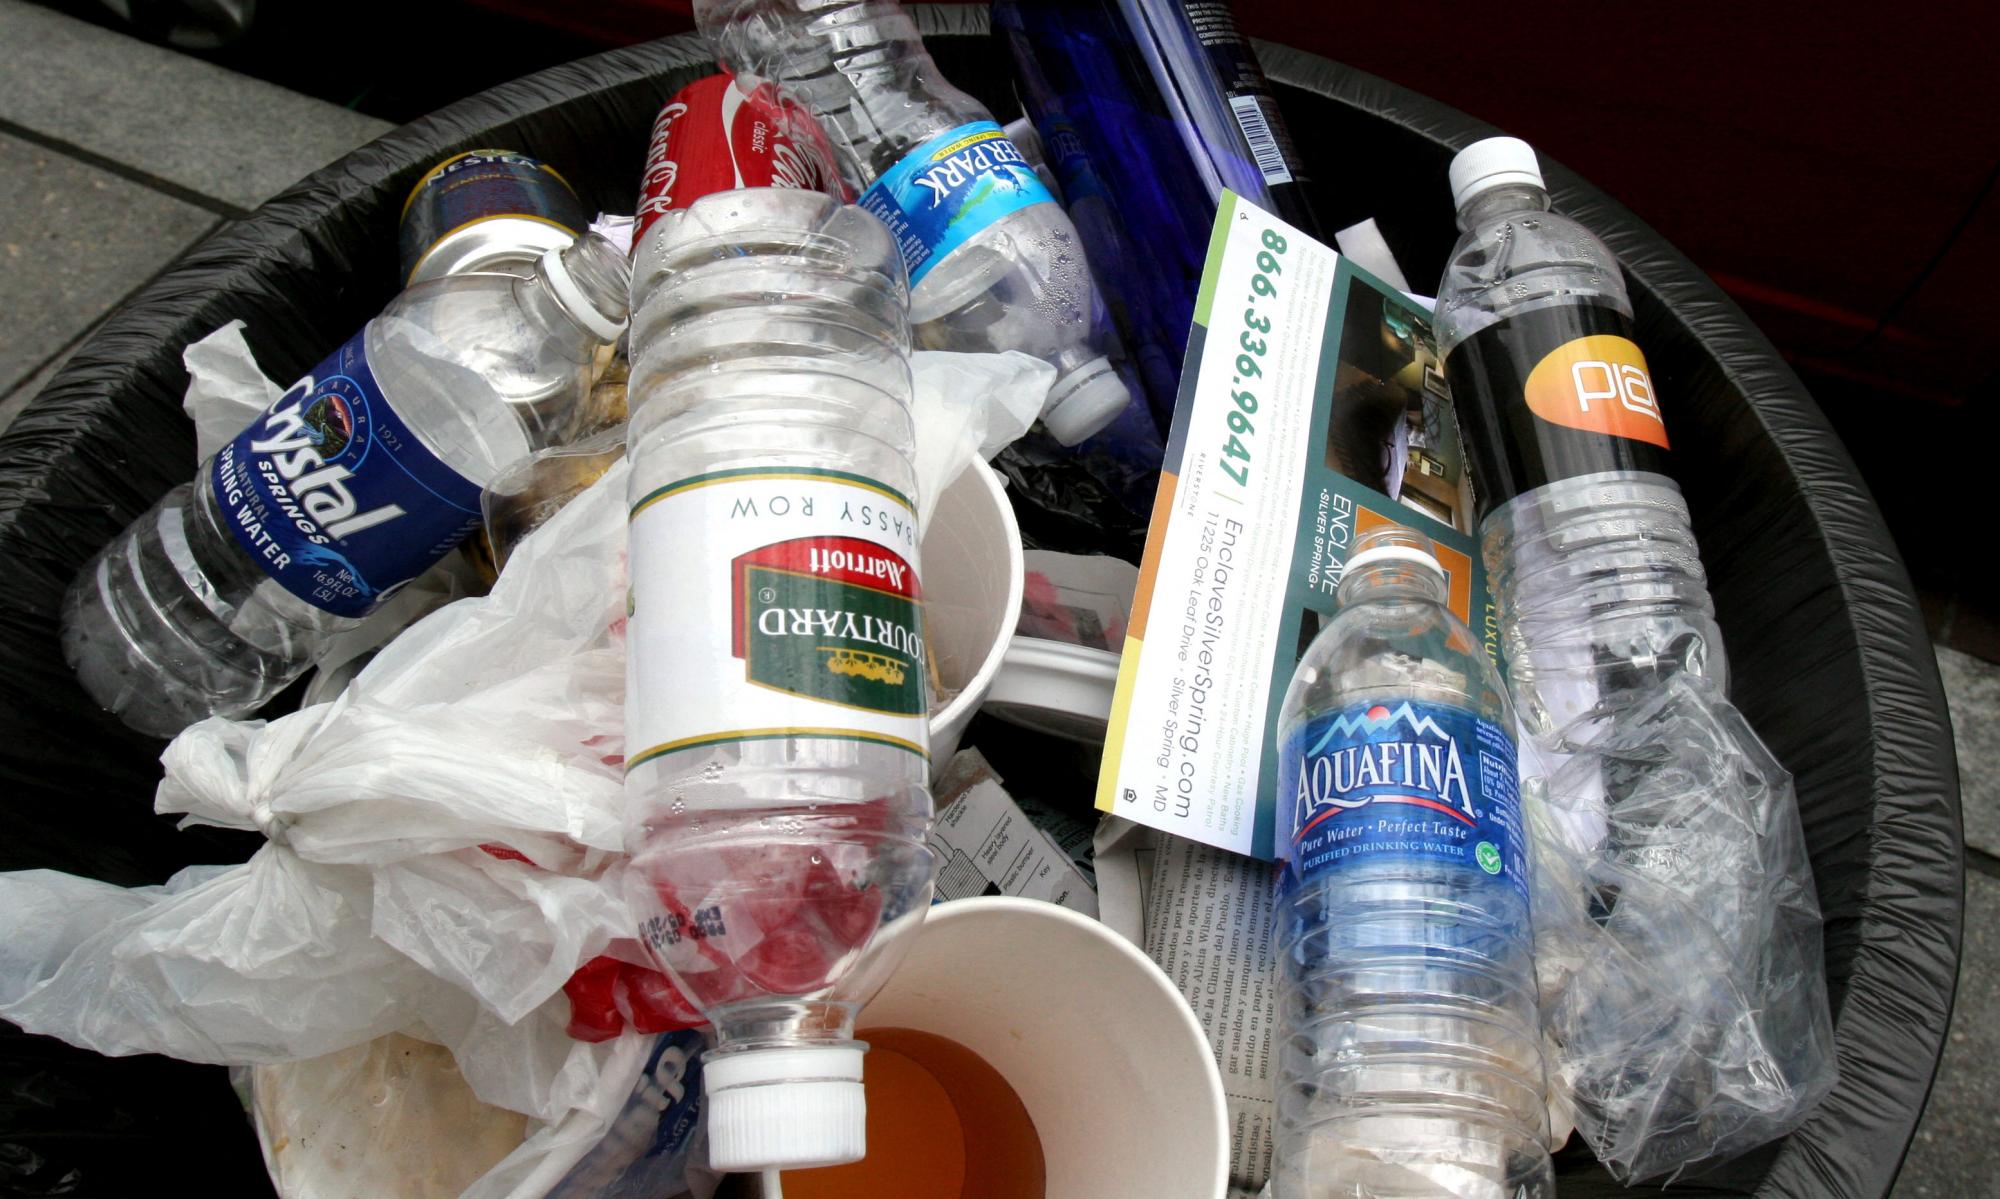 Only 5% of plastic waste generated by US last year was recycled, report says